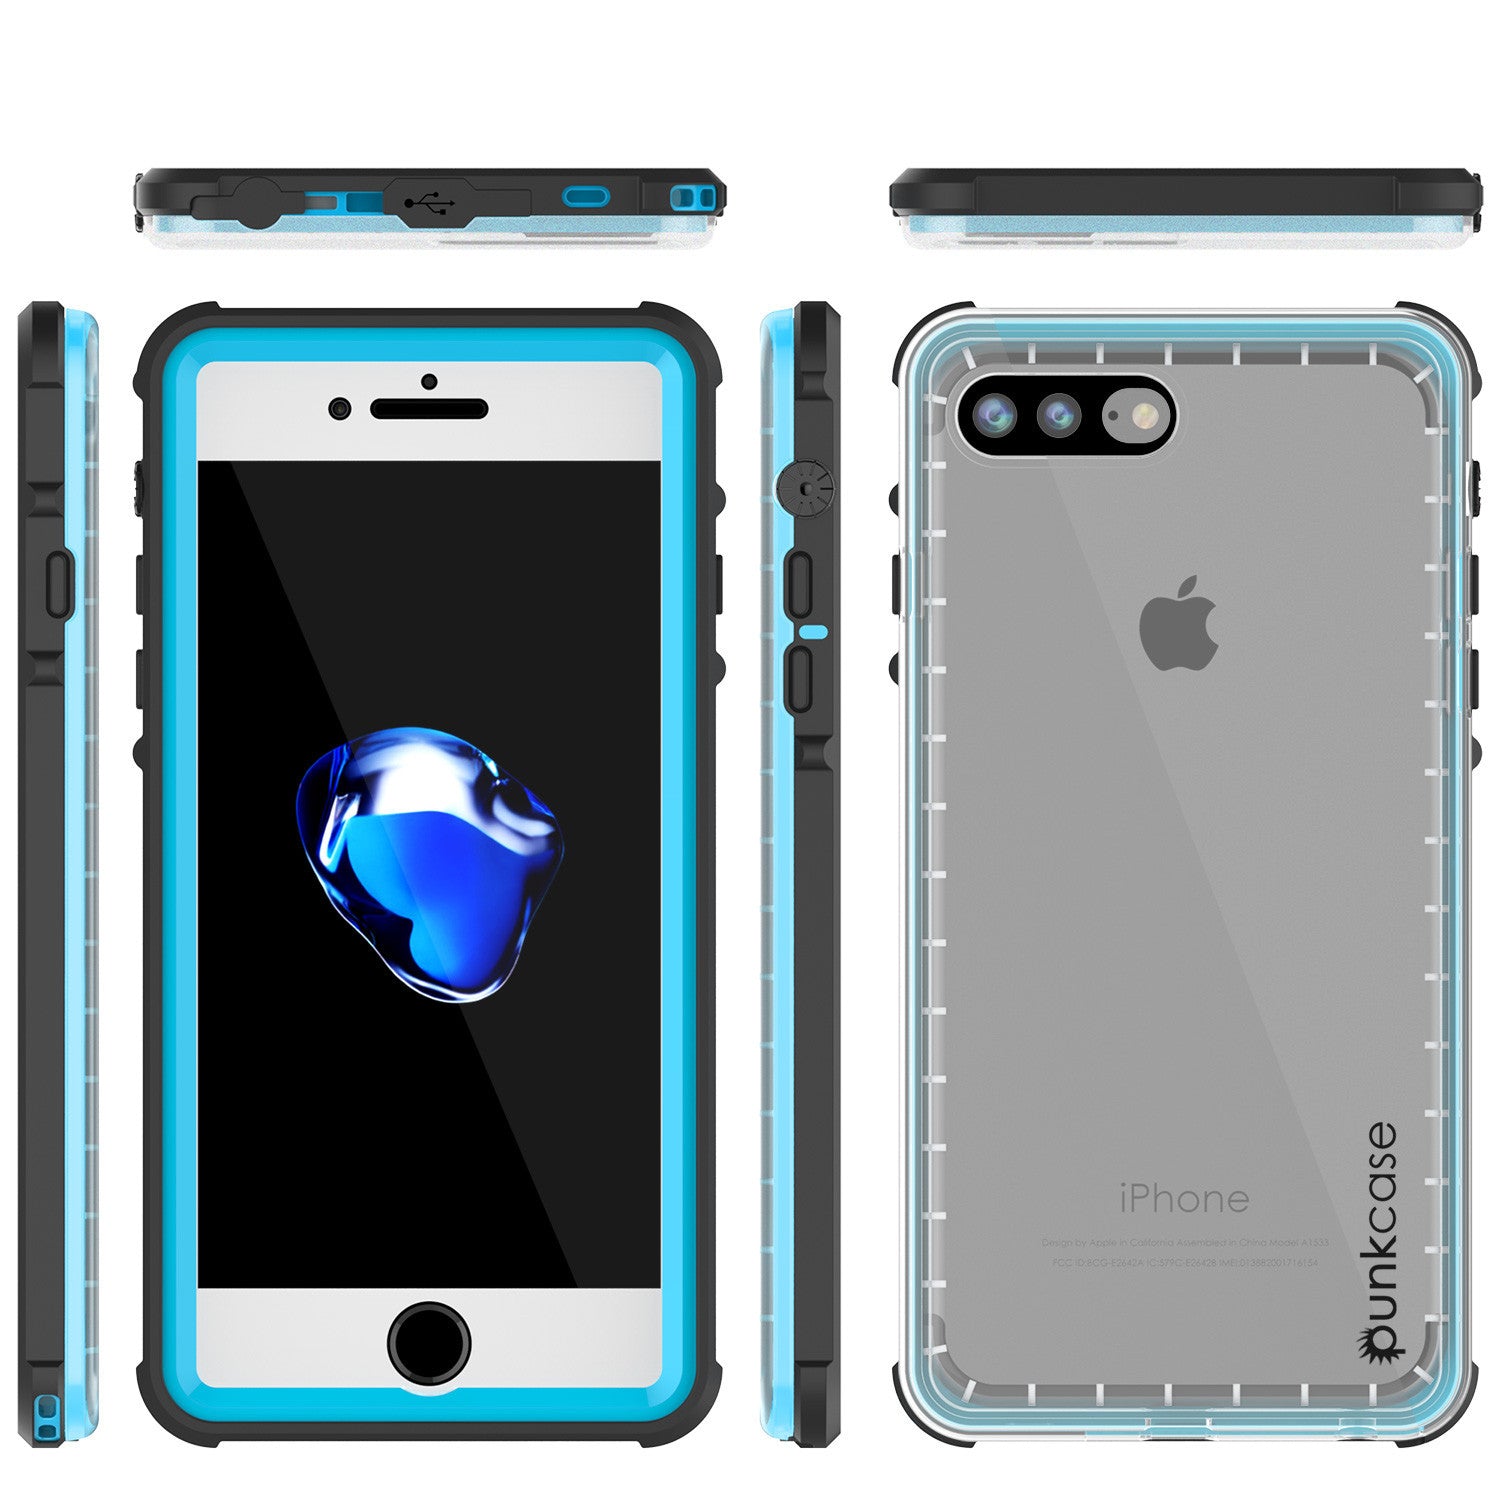 iPhone 7+ Plus Waterproof Case, PUNKcase CRYSTAL Light Blue W/ Attached Screen Protector | Warranty